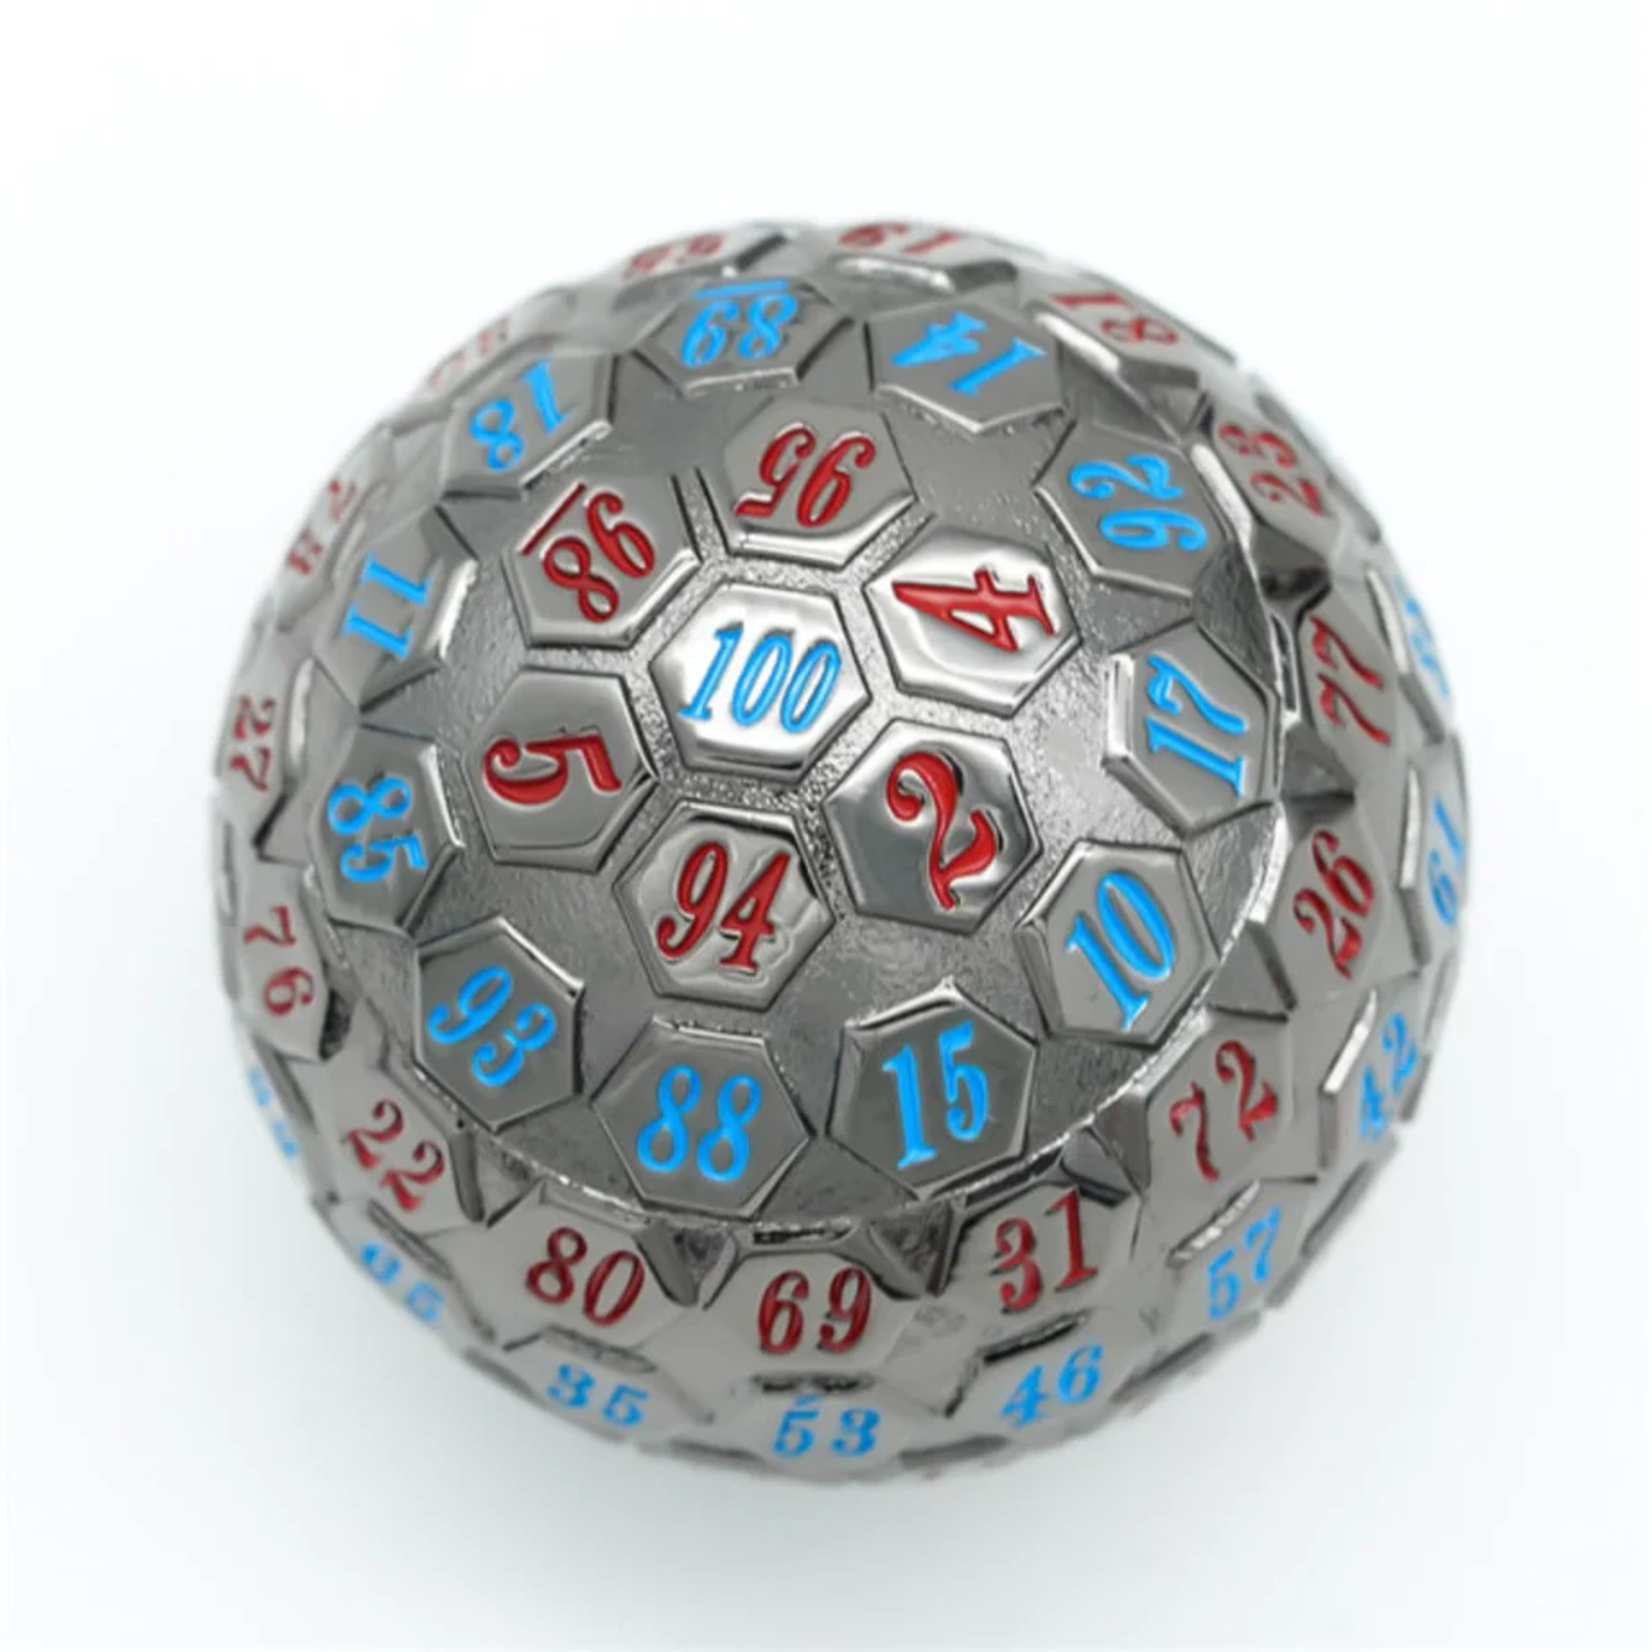 Foam Brain Games 45 mm Metal d100 Black Metal with Red and Blue